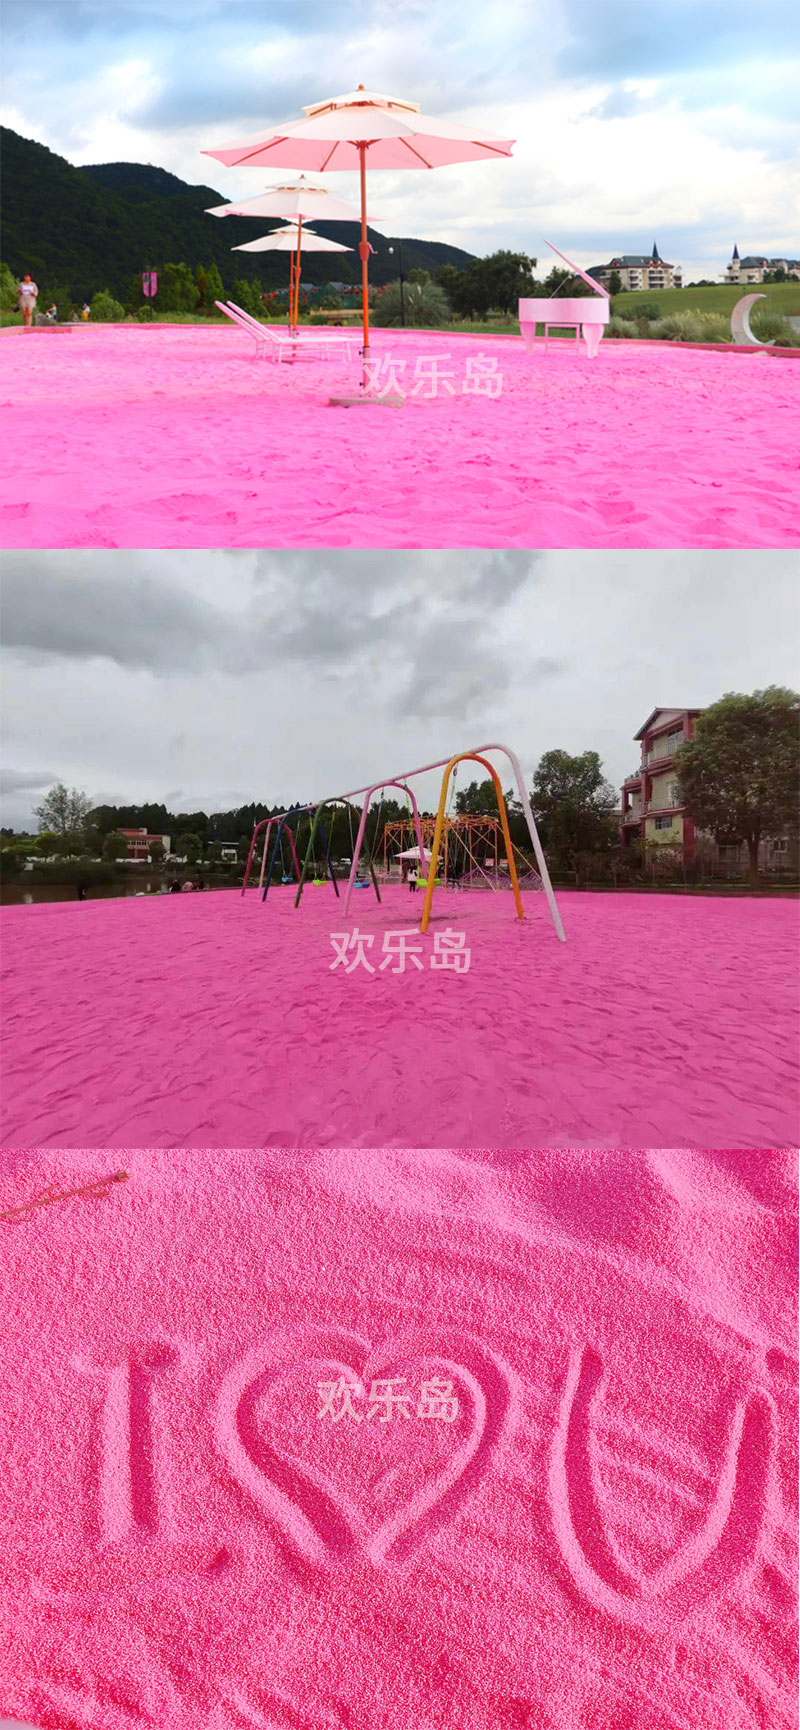 Contact Happy Island to purchase pink sand